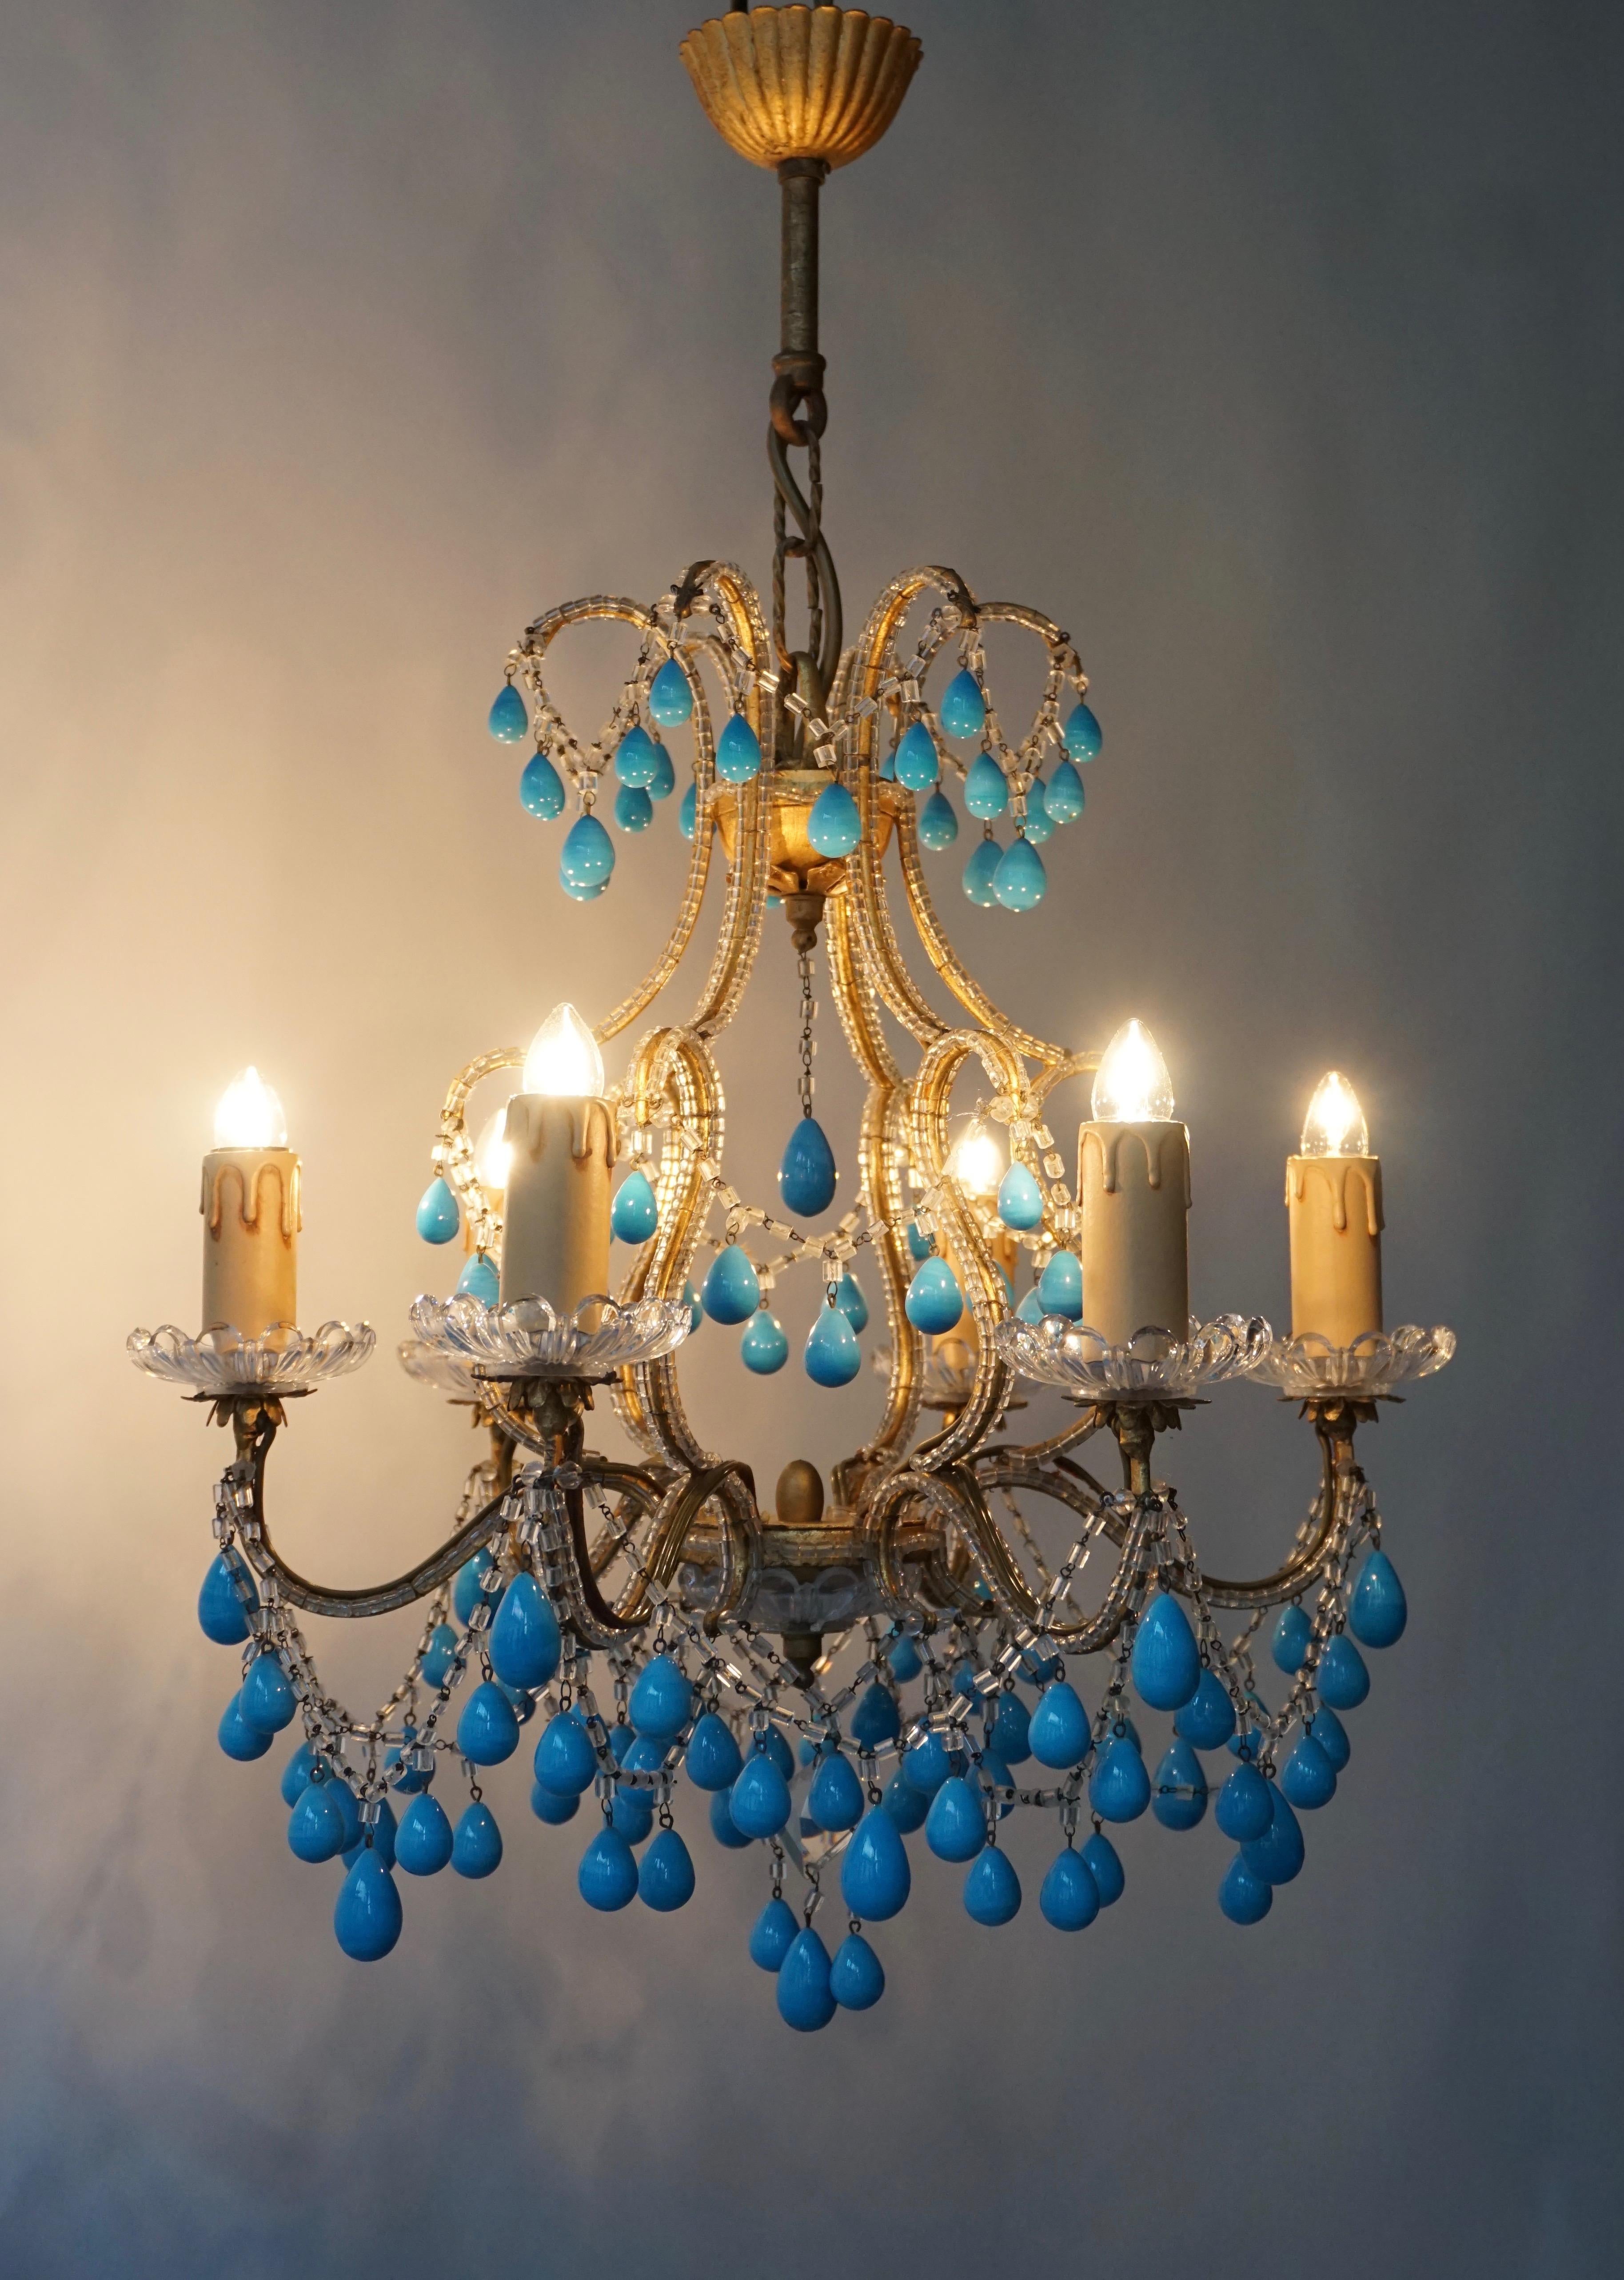 Pair of Elegant Italian Chandeliers with Turquoise Stone For Sale 6